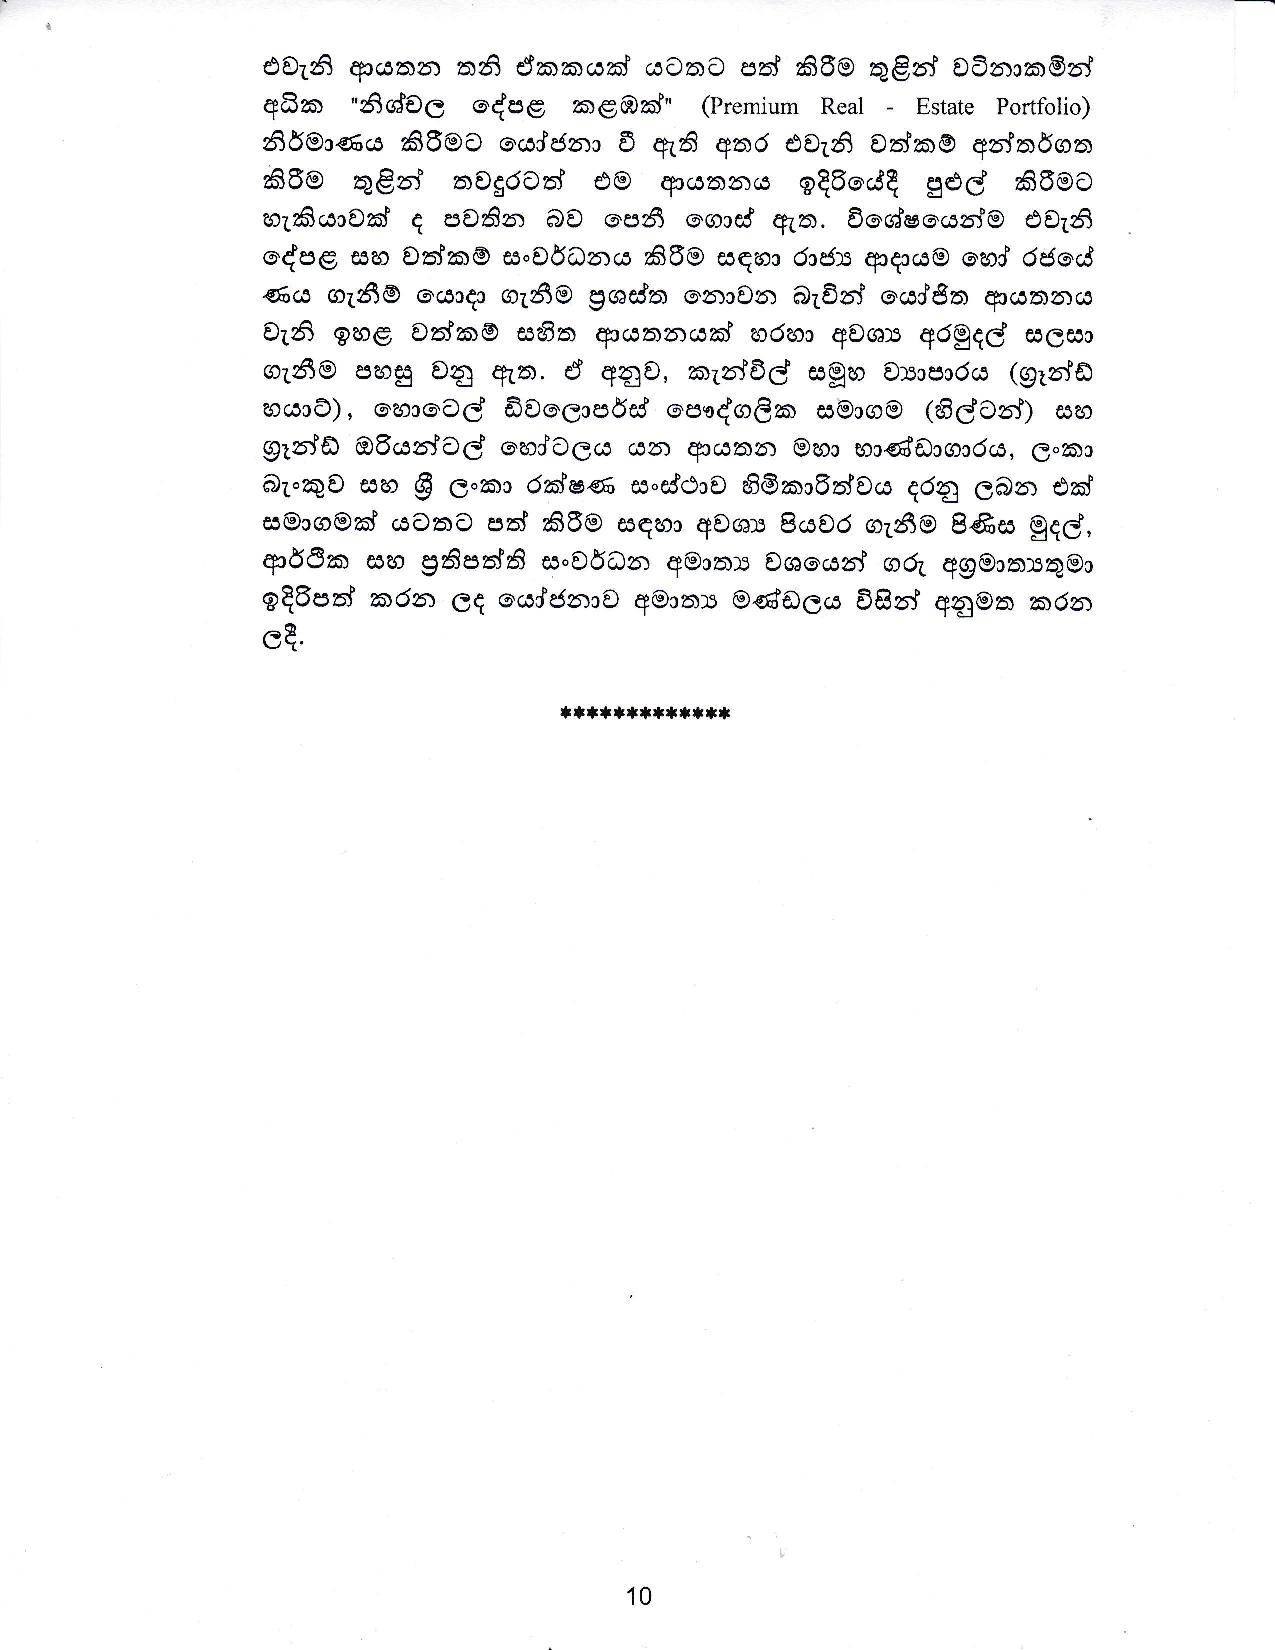 Cabinet Decision on 04.03.2020 page 010